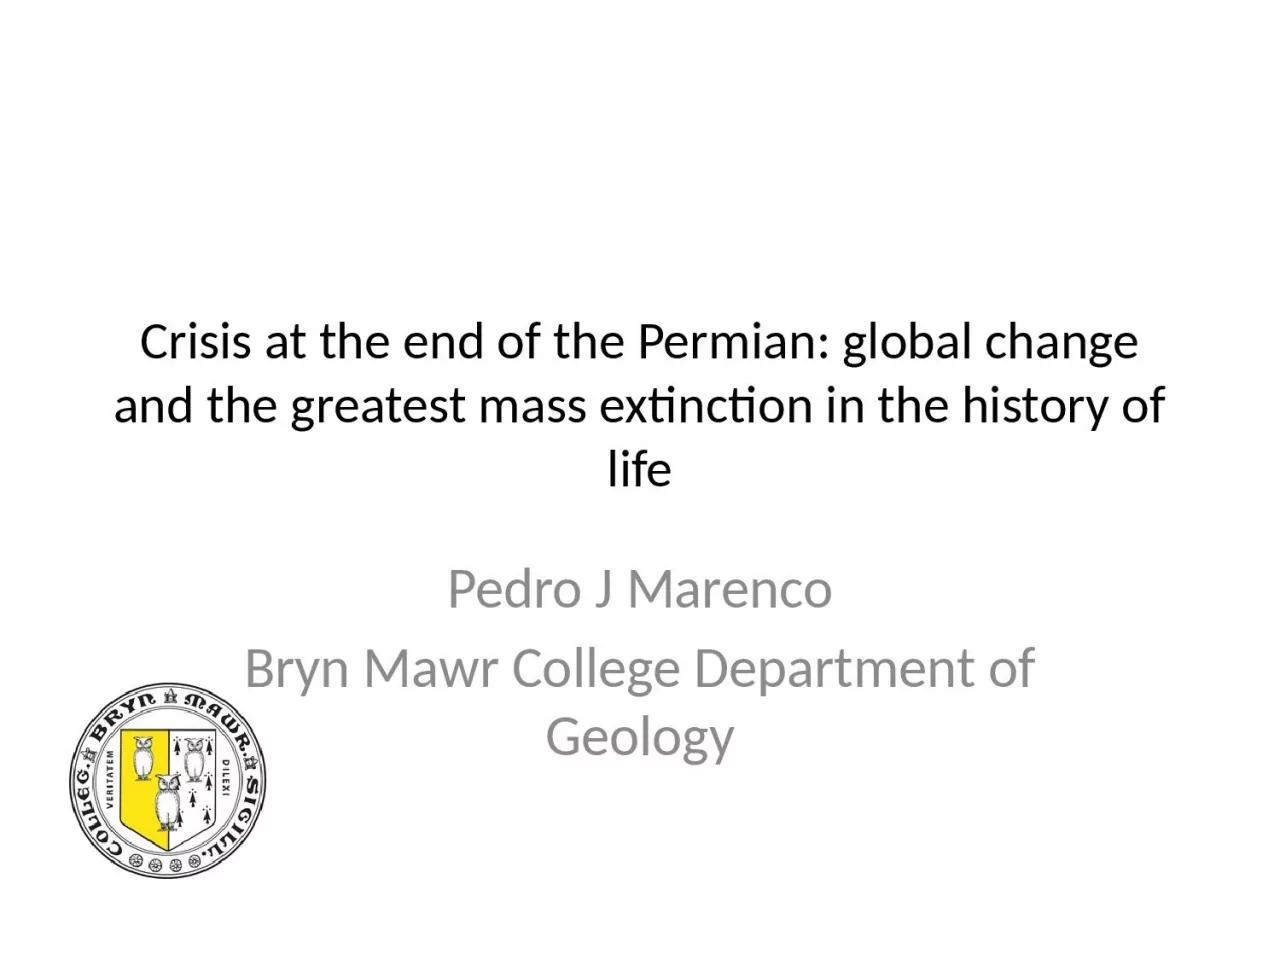 Crisis at the end of the Permian: global change and the greatest mass extinction in the